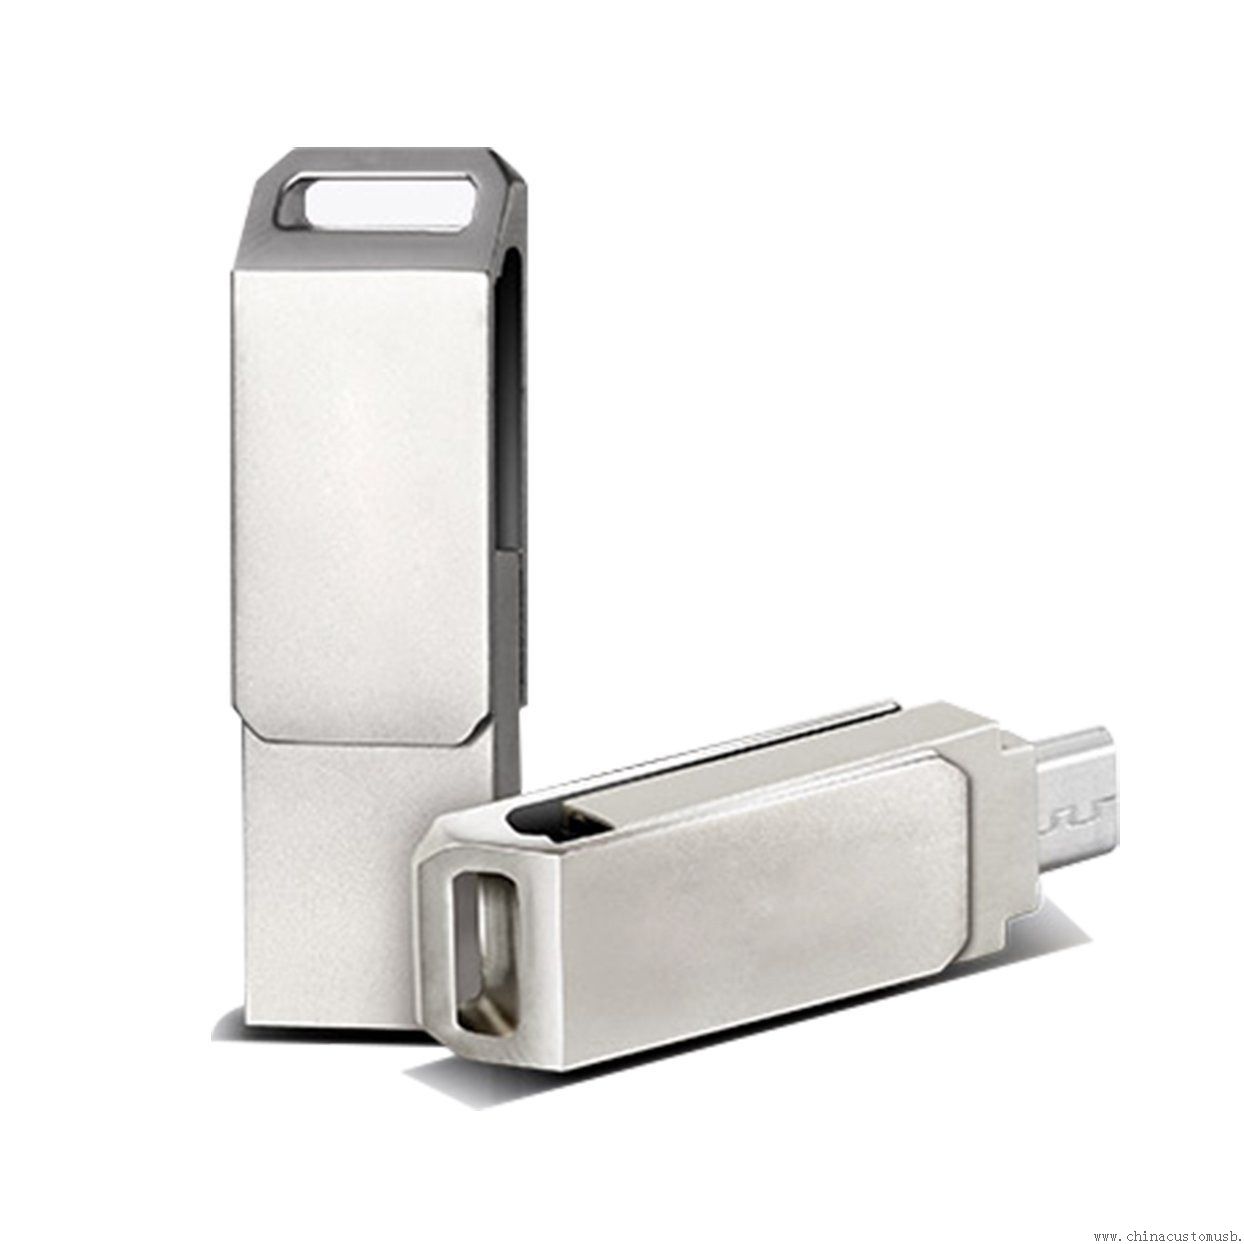 Metal Swivel OTG USB Disk For Android Smartphone